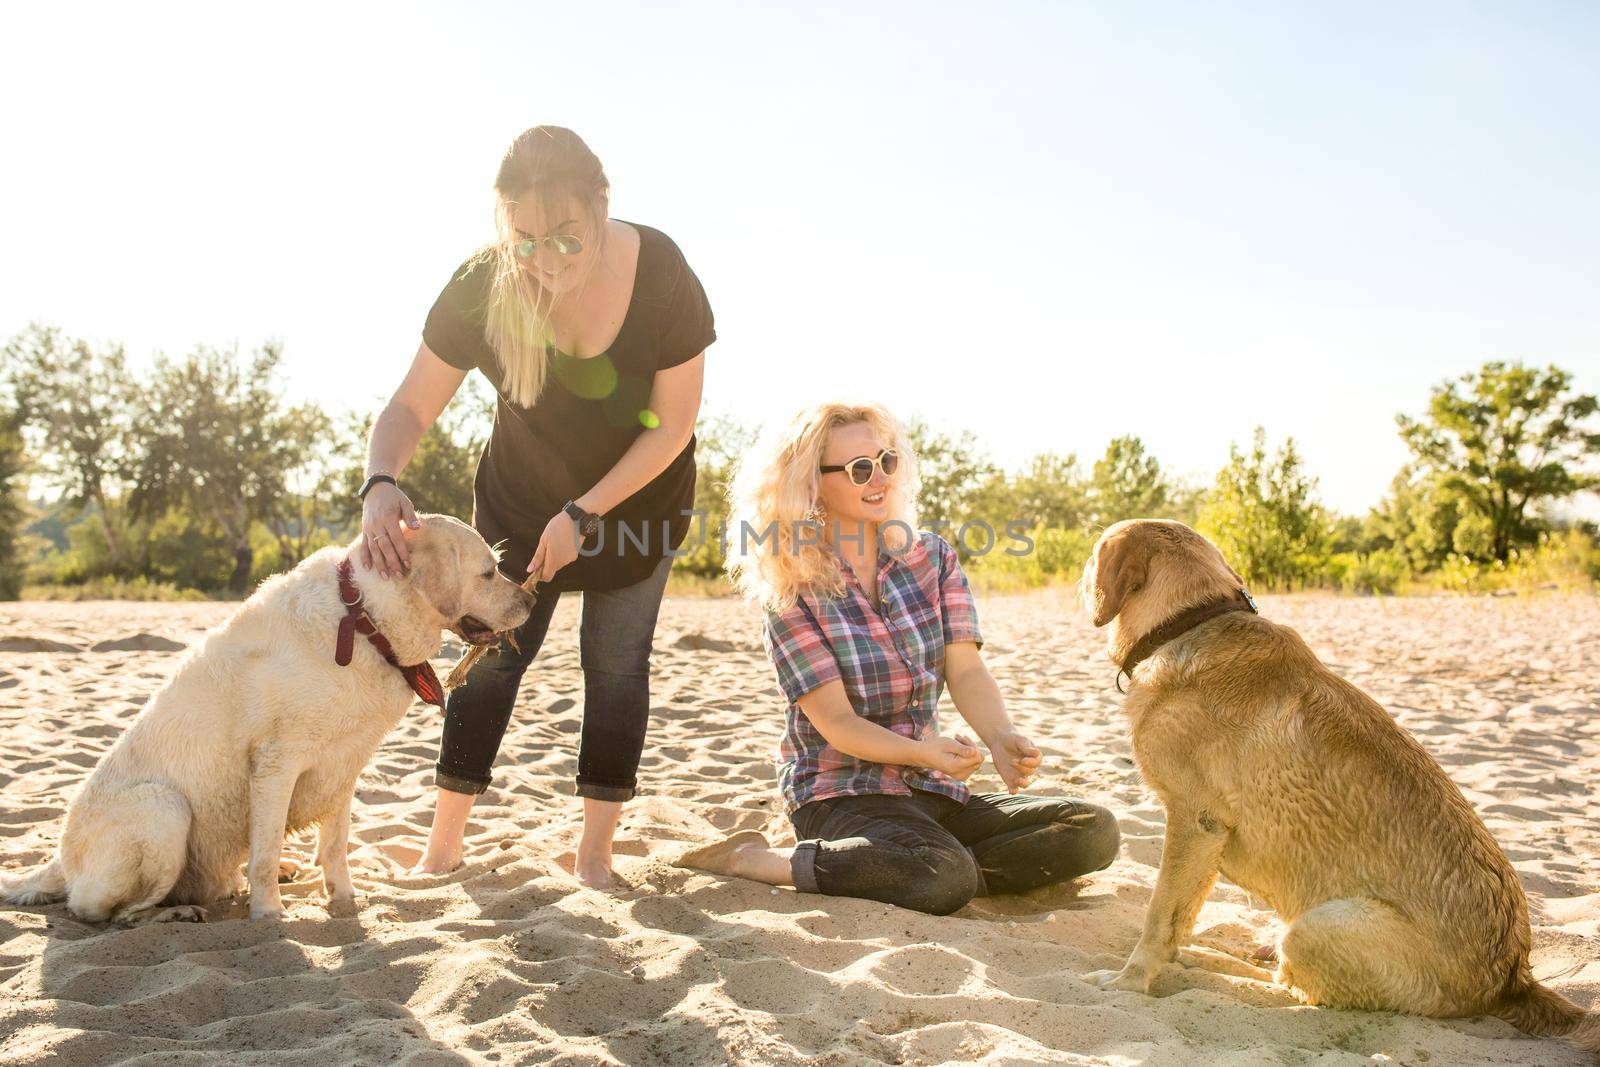 Two labrador friends playing on the beach. Two young women with two dogs in the sand